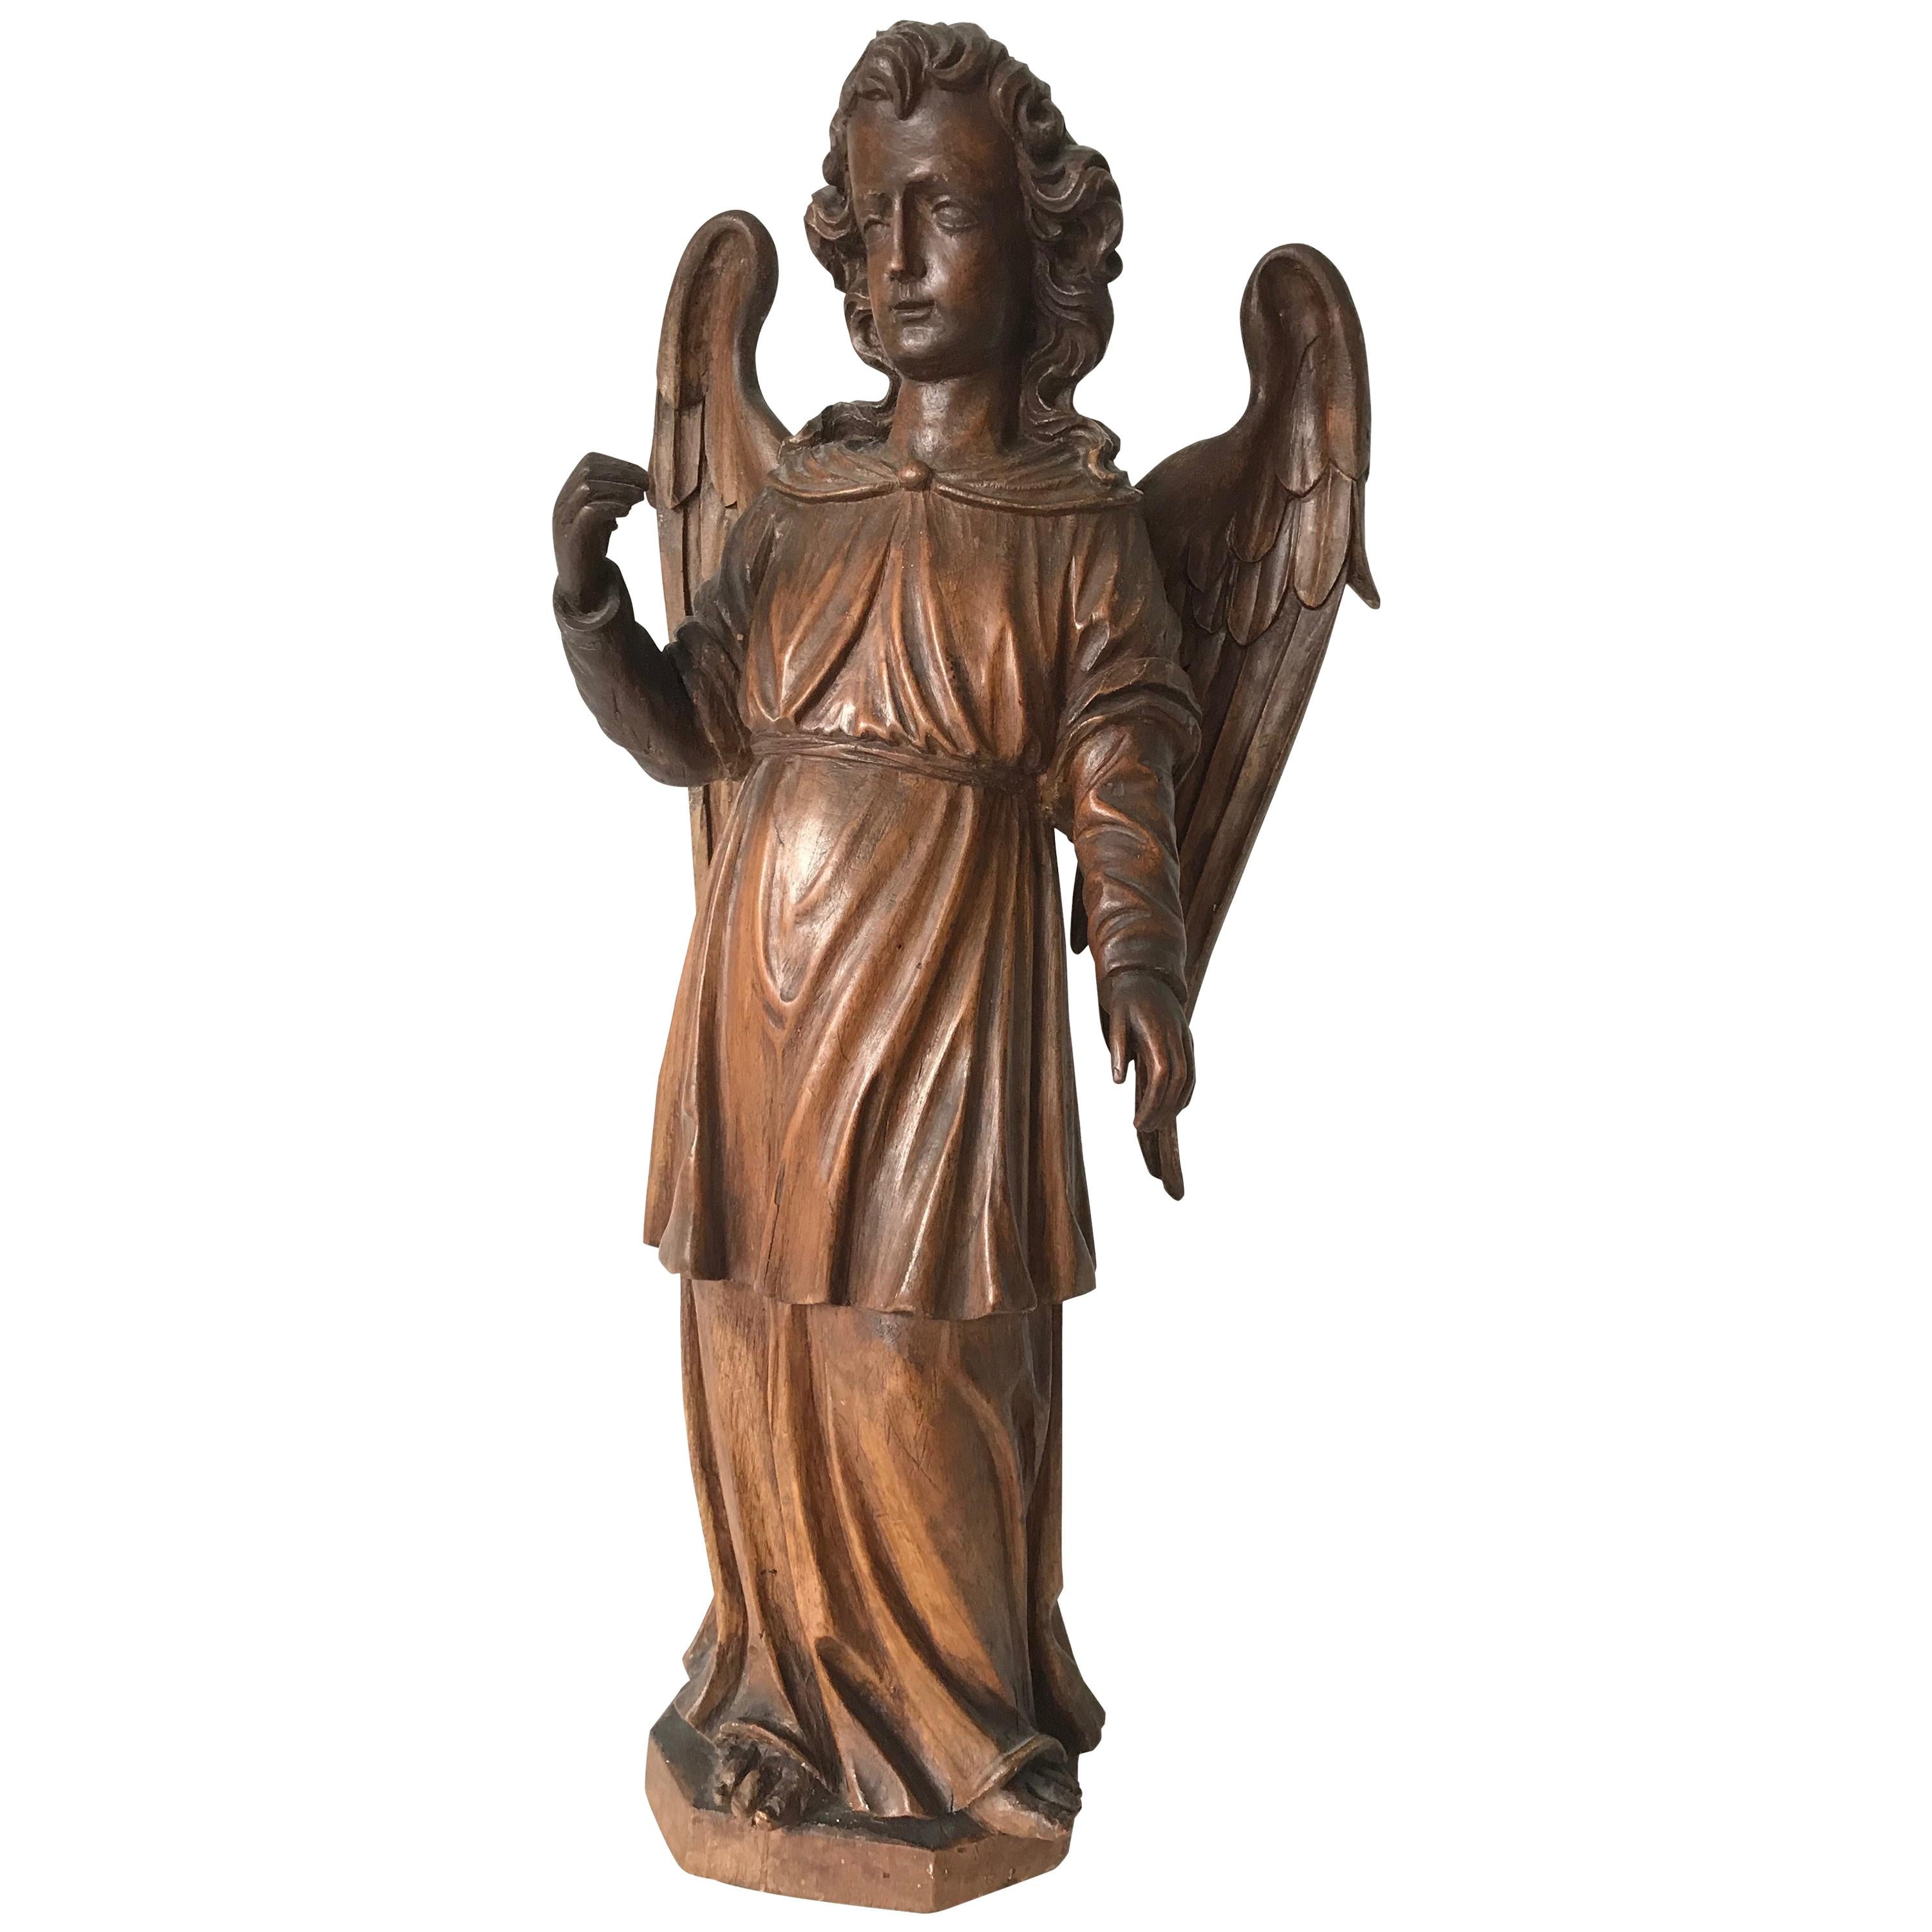 Hand-Carved Oak Angel Statue / Sculpture with Wings Possibly Saint Michael